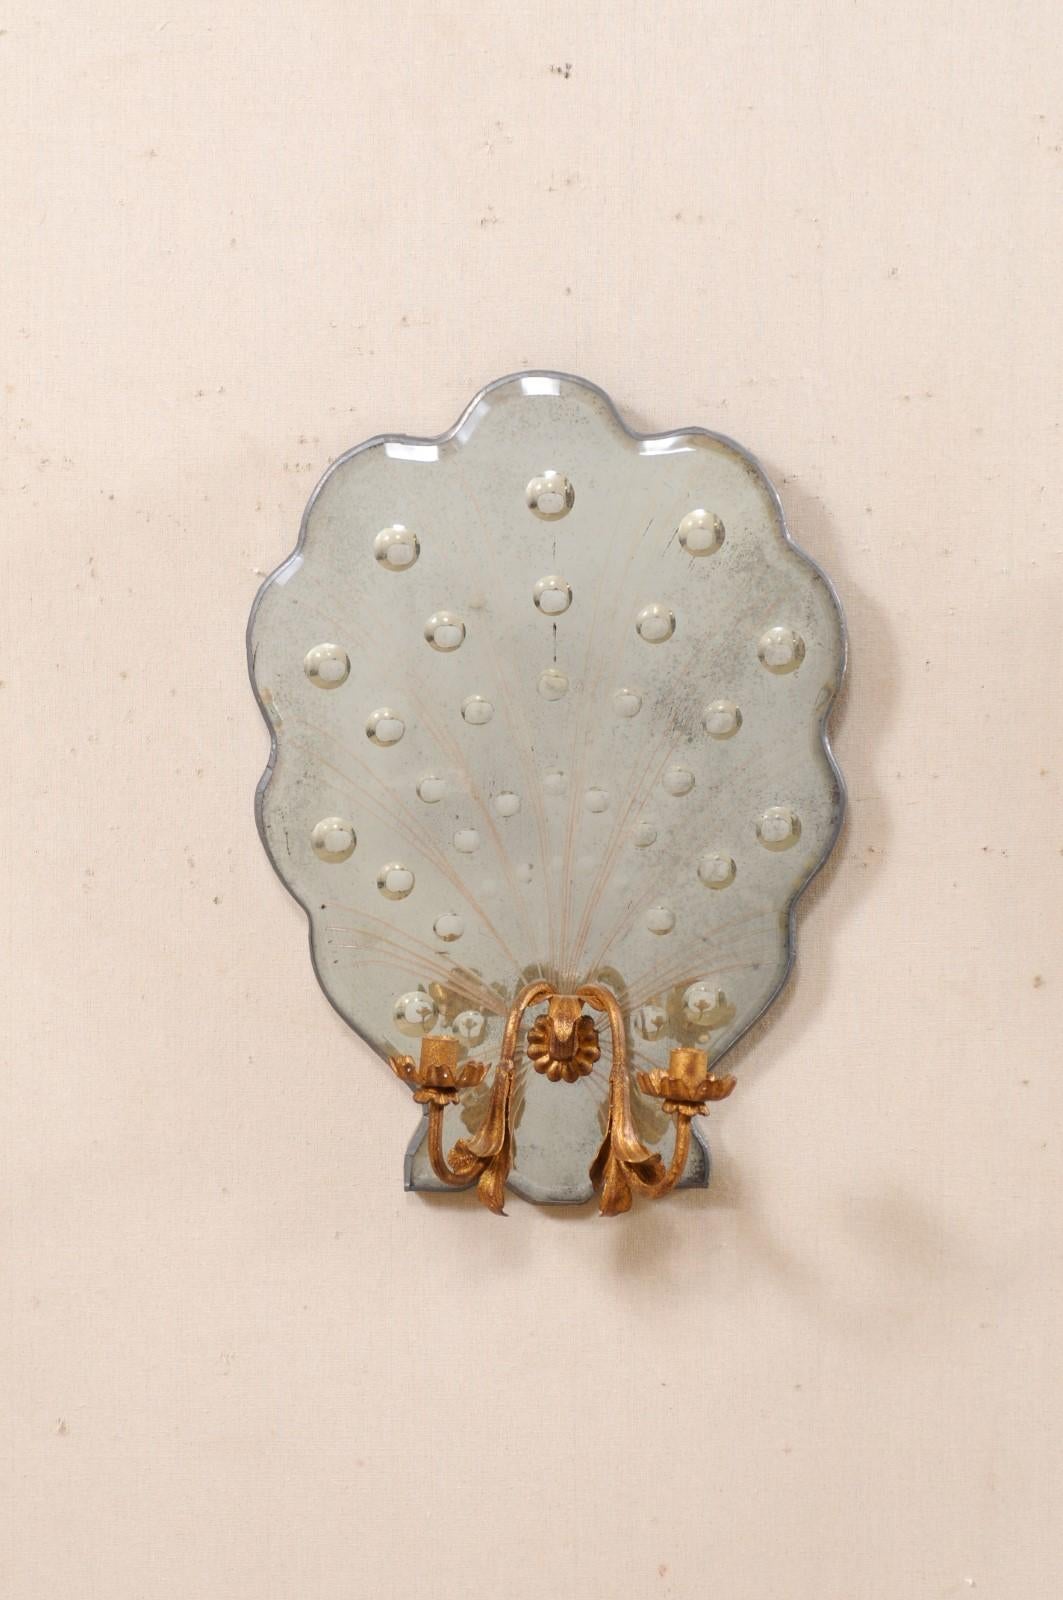 American Pair of Art Deco Style Candle Sconces with Shell-Shapes & Flirty Bubble Mirrors